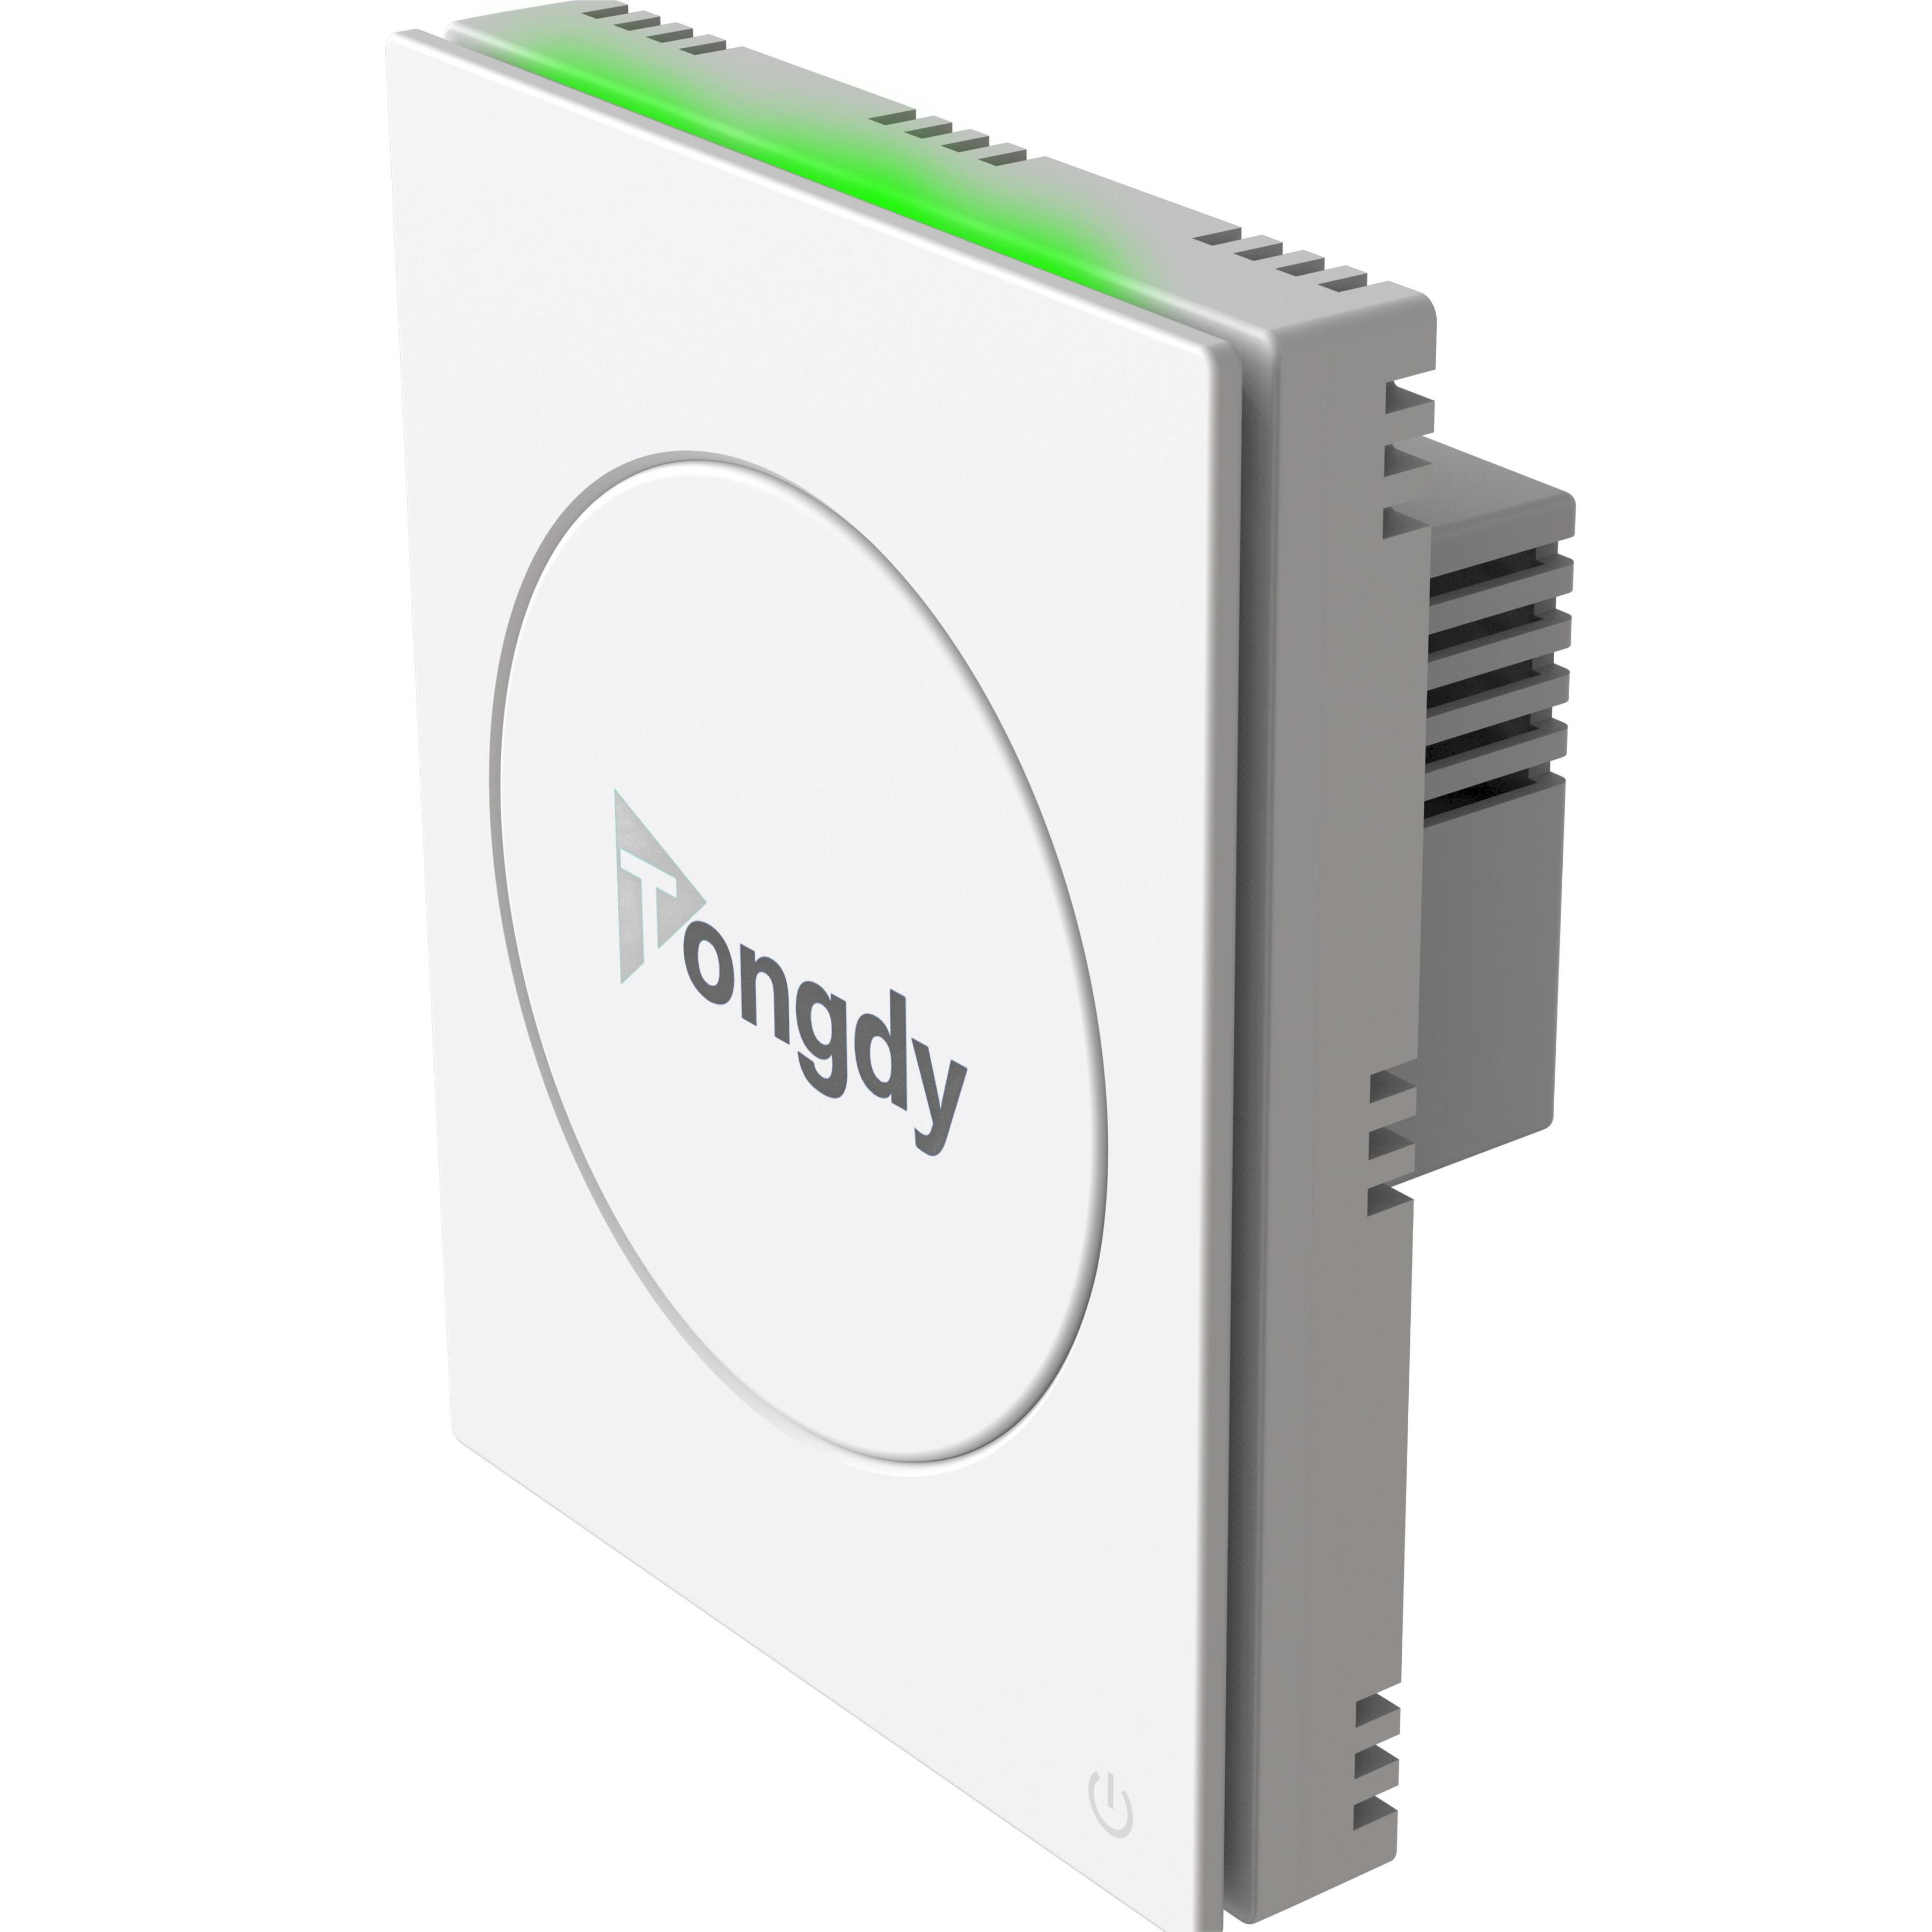 Indoor Air Quality Monitor for Homes and Businesses